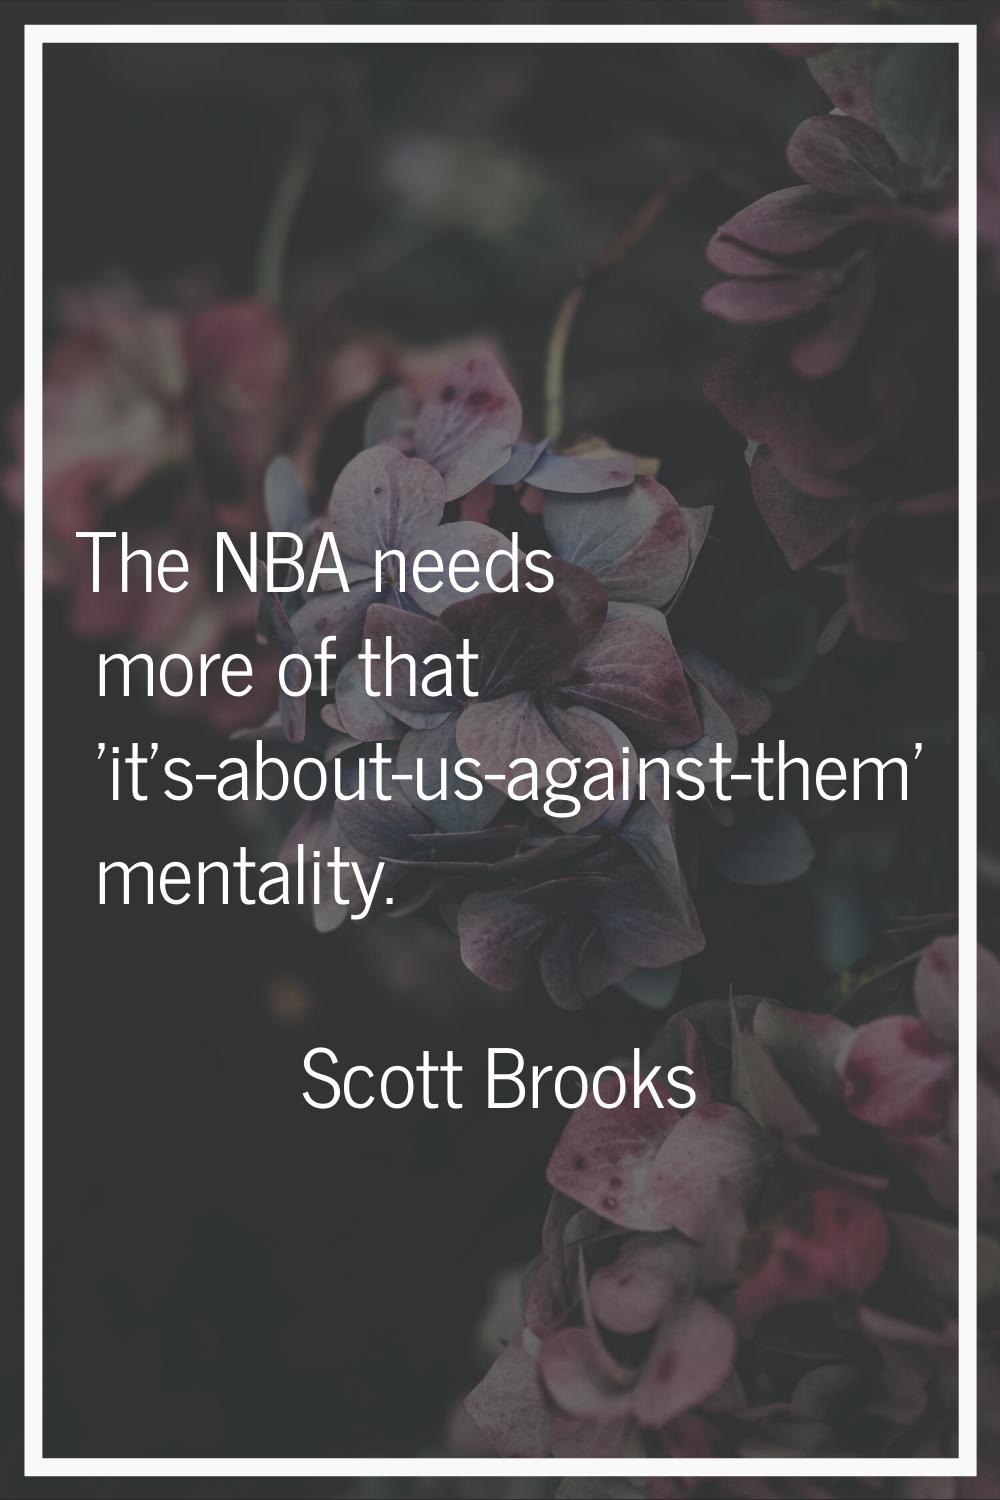 The NBA needs more of that 'it's-about-us-against-them' mentality.